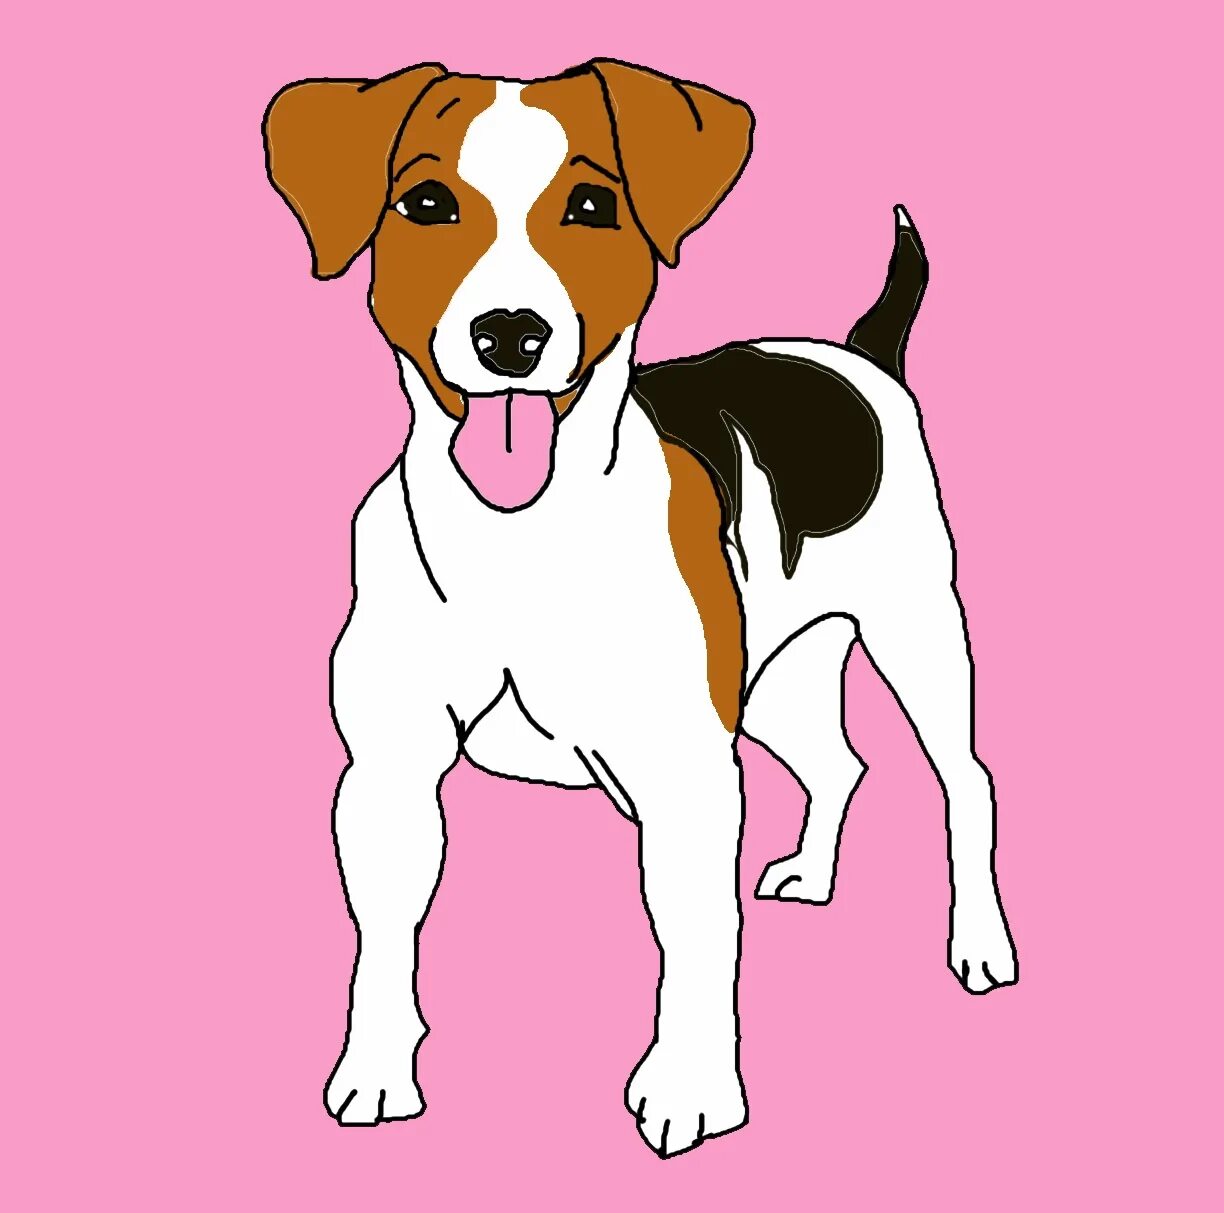 Jack russell terrier dog #4